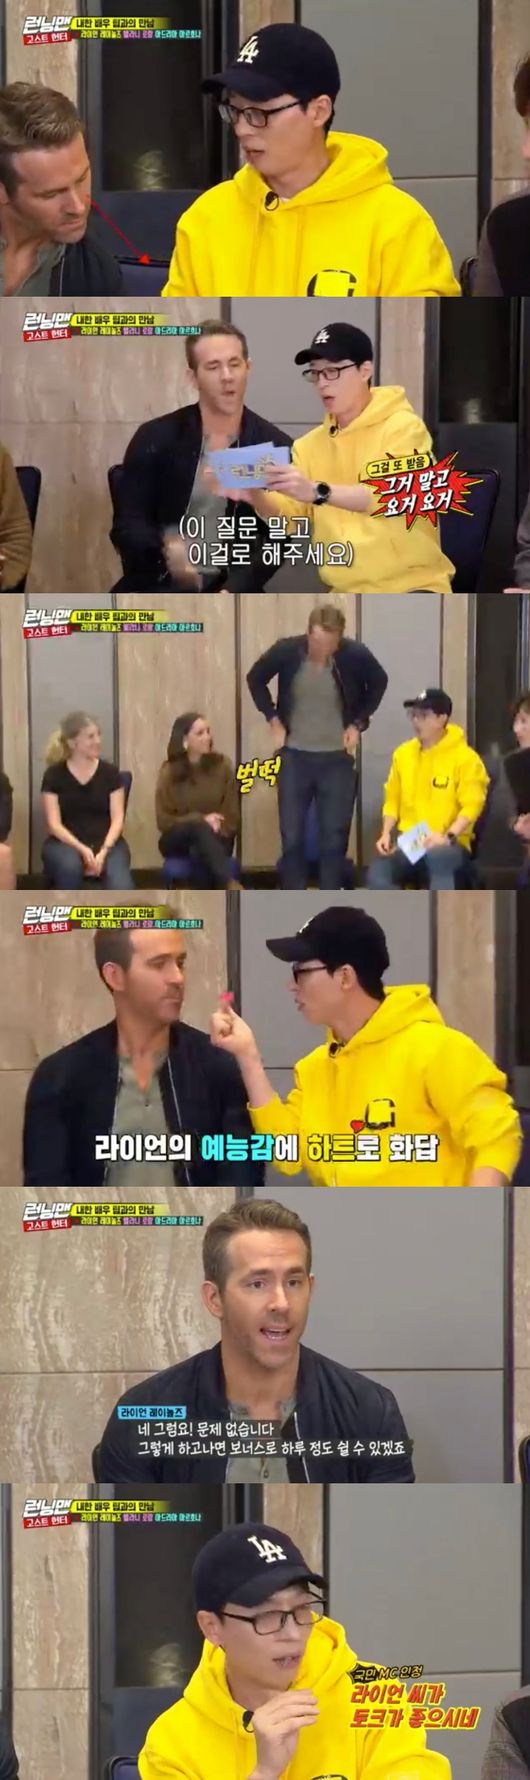 Hollywood actor Lion Laynolds boasted an artistic sense that overturned expectations in Running Man.All members of Running Man including Yoo Jae-Suk admired Lion Laynolds dedication.Hollywood stars Lion Laynolds, Melanie Laurent, Adria Arhona and actor Hwang Bora appeared as special guests on SBS entertainment program Running Man broadcast on the 22nd.On this day, Running Man was decorated with Ghost Hunter Boot Ltd Race.Two of the nine members were Ghost, and they had to make a mistake on the mission and put their name on the penalty roulette.Hunter Boot Ltd had to grasp the Ghost and exclude them from the roulette to win.The members of Running Man performed missions such as shouting Gwangsu as much as the answer of the arithmetic operation, and attaching the ball to the other clothes the most.Among them, Yoo Jae-Suk was suspected of being a ghost, and the members expectations were accurate.The full-scale game began after the joining of Lion Laynolds, Melanie Laurent and Adriatic Arhona, especially Lion Laynolds, who boasted a low-world tension from its appearance, and surprised everyone.The scene was more cheerful in the humanity that I did not expect from the Hollywood star.Lion, Melanie and Adria visited the Netflix original film 6 Underground promotional car Korea.The time they could join Running Man was two hours before leaving the country.After quickly promoting the film, the three actors had a brief interview with Running Man when Lion watched Yoo Jae-Suks cue sheet, and shivered as if he understood the question.And after pretending to lower his pants, he said he misunderstood the cue sheets; the members admired his unexpected sense of entertainment.This is Lions second visit to Korea; earlier, at the time of his first visit, Lion said he would take a bottle of soju.When Yoo Jae-Suk asked a question related to this, Lion said: No problem, after doing so, you can take a day off with a bonus.I have never refused when I recommended alcohol. Adria was asked: Who is the youngest member of the members? Adria pointed to Jeon So-min, who said she looked 27.He then told Ji Suk-jin that he looked 36 years old, and Ji Suk-jin was excited.Lion also spoke: He saw a heavily pleased Ji Suk-jin, predicting he would be 42.When Ji Suk-jin revealed he was 54, Lion immediately shouted Dad (Father); Ji Suk-jin was a bit embarrassed and denied Father.Adria then mentioned her father, a musician, and Kim Jong-kook asked, Do you have a Korean song you know?Lion then put her shoulder on and said, Show me the BTS tattoo, adding: Is I too serious, no one knows if I have a tattoo?Lion continued to joke, I have an EXO tattoo on my back. He showed his inner voice to Yoo Jae-Suk.Yoo Jae-Suk laughed, saying, The world star showed me his inner life.The last mission is to be divided into an actor team and a running man team, and to Lay a Korean traditional game.The Korean actor team selected Yoo Jae-Suk, Ji Suk-jin and Lee Kwang-soo as team members in advance, and was expected to lose the most weak Layers.Lion was great, though, not only did he make the kicks better than the Korean, but he also boasted of his excellent scabbling skills.He showed his skill and showed a great desire to compete.In the end, Lion led the victory of the Korean actor team, which received Korean snacks as a product, and ate bread and honey.Lion, Melanie and Adria seemed to like the first Korean snack they ate.Time has come to choose Ghost: Lion and members have named Yoo Jae-Suk and Kim Jong-kook as Ghosts.Lion then picked out a wig and chiropractic massage as a penalty for the defeated team to receive.As Lion expected, the Ghosts were Yoo Jae-Suk and Kim Jong-kook, and the two were penalized.On this day, Lion Laynolds was incredibly talented as an entertainer, and the members of Running Man were surprised by Lions unique sense of entertainment.In particular, Yoo Jae-Suk responded to I like my mouth too much and I am looking forward to it and raised Lion.As such, Lion captivated the house theater with a delightful and pleasant charm and gave a big smile.Running Man screen captures